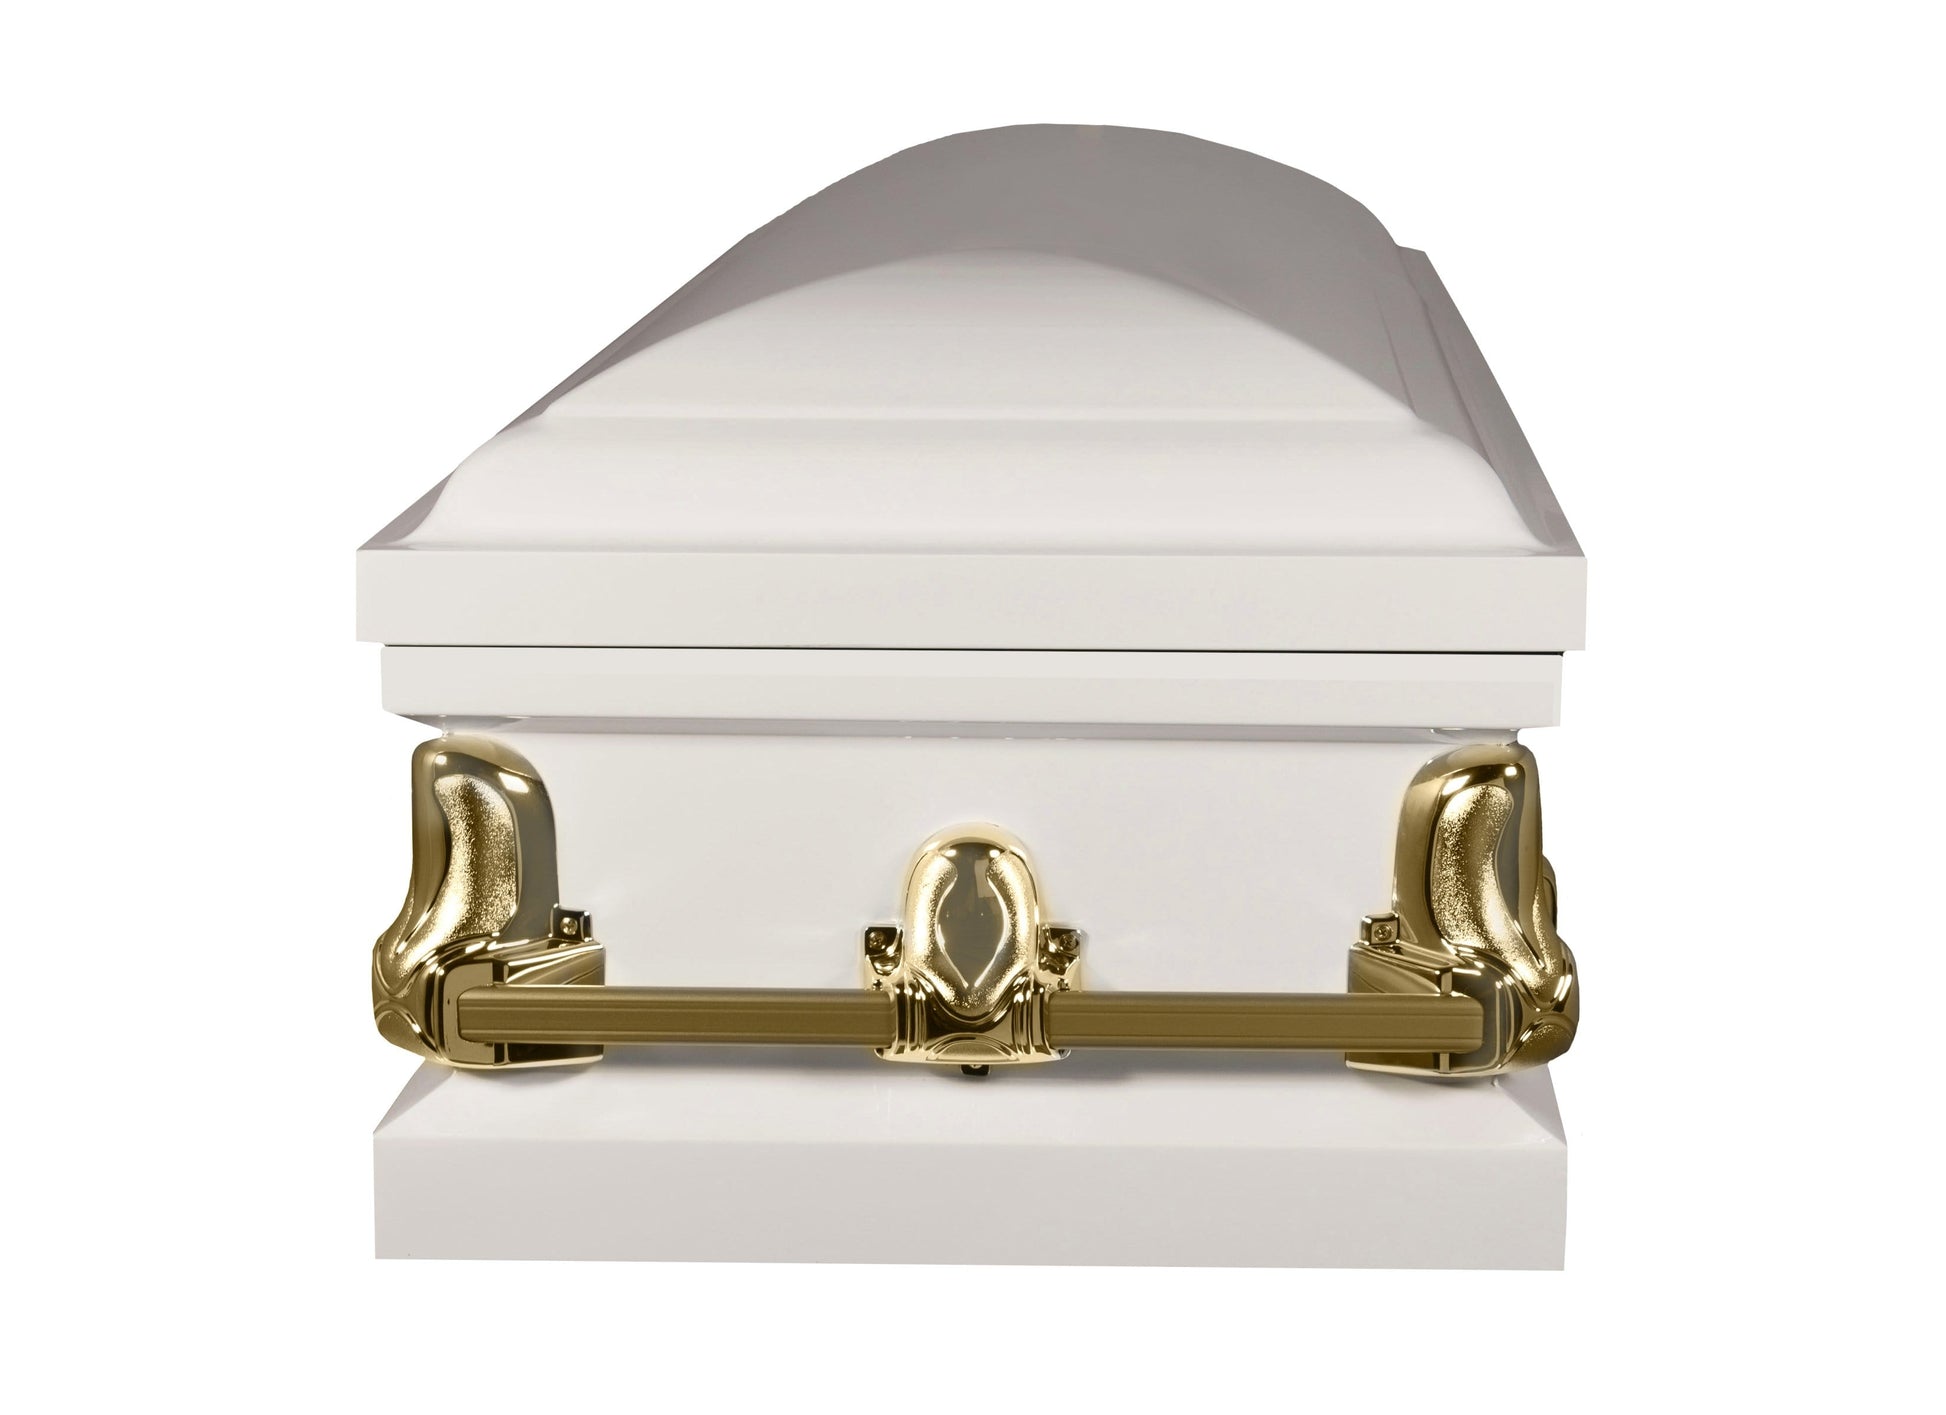 Orion Series | White and Gold Steel Casket with White Interior - Titan Casket